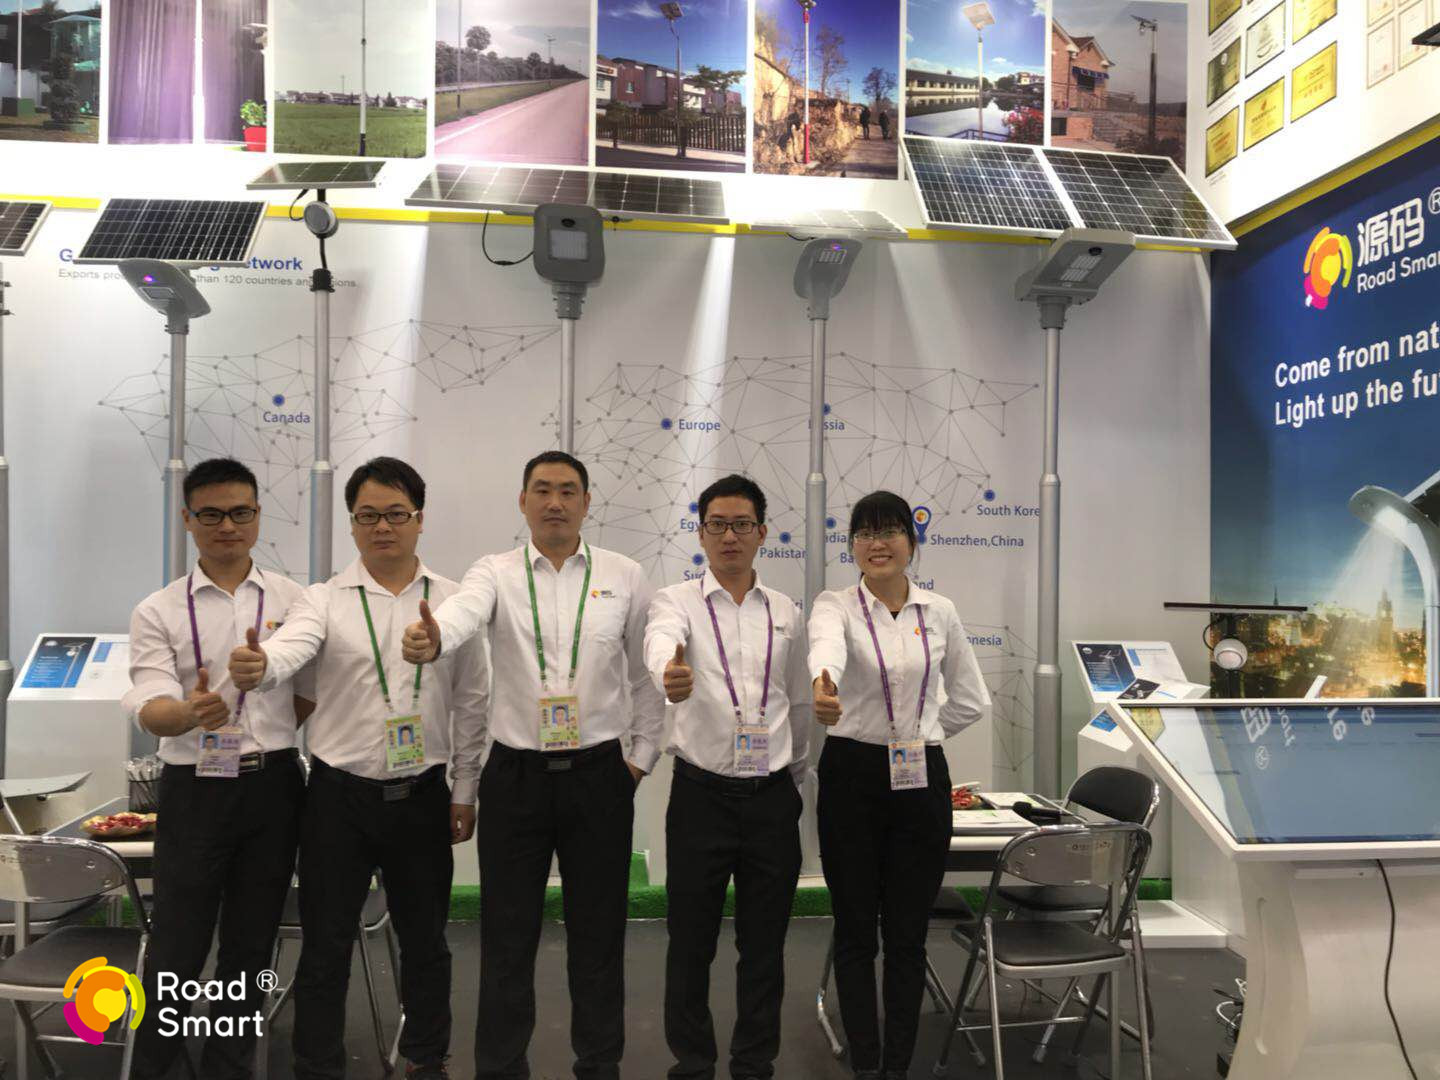 Road Smart has gained many fans at the solar street light canton fair! 